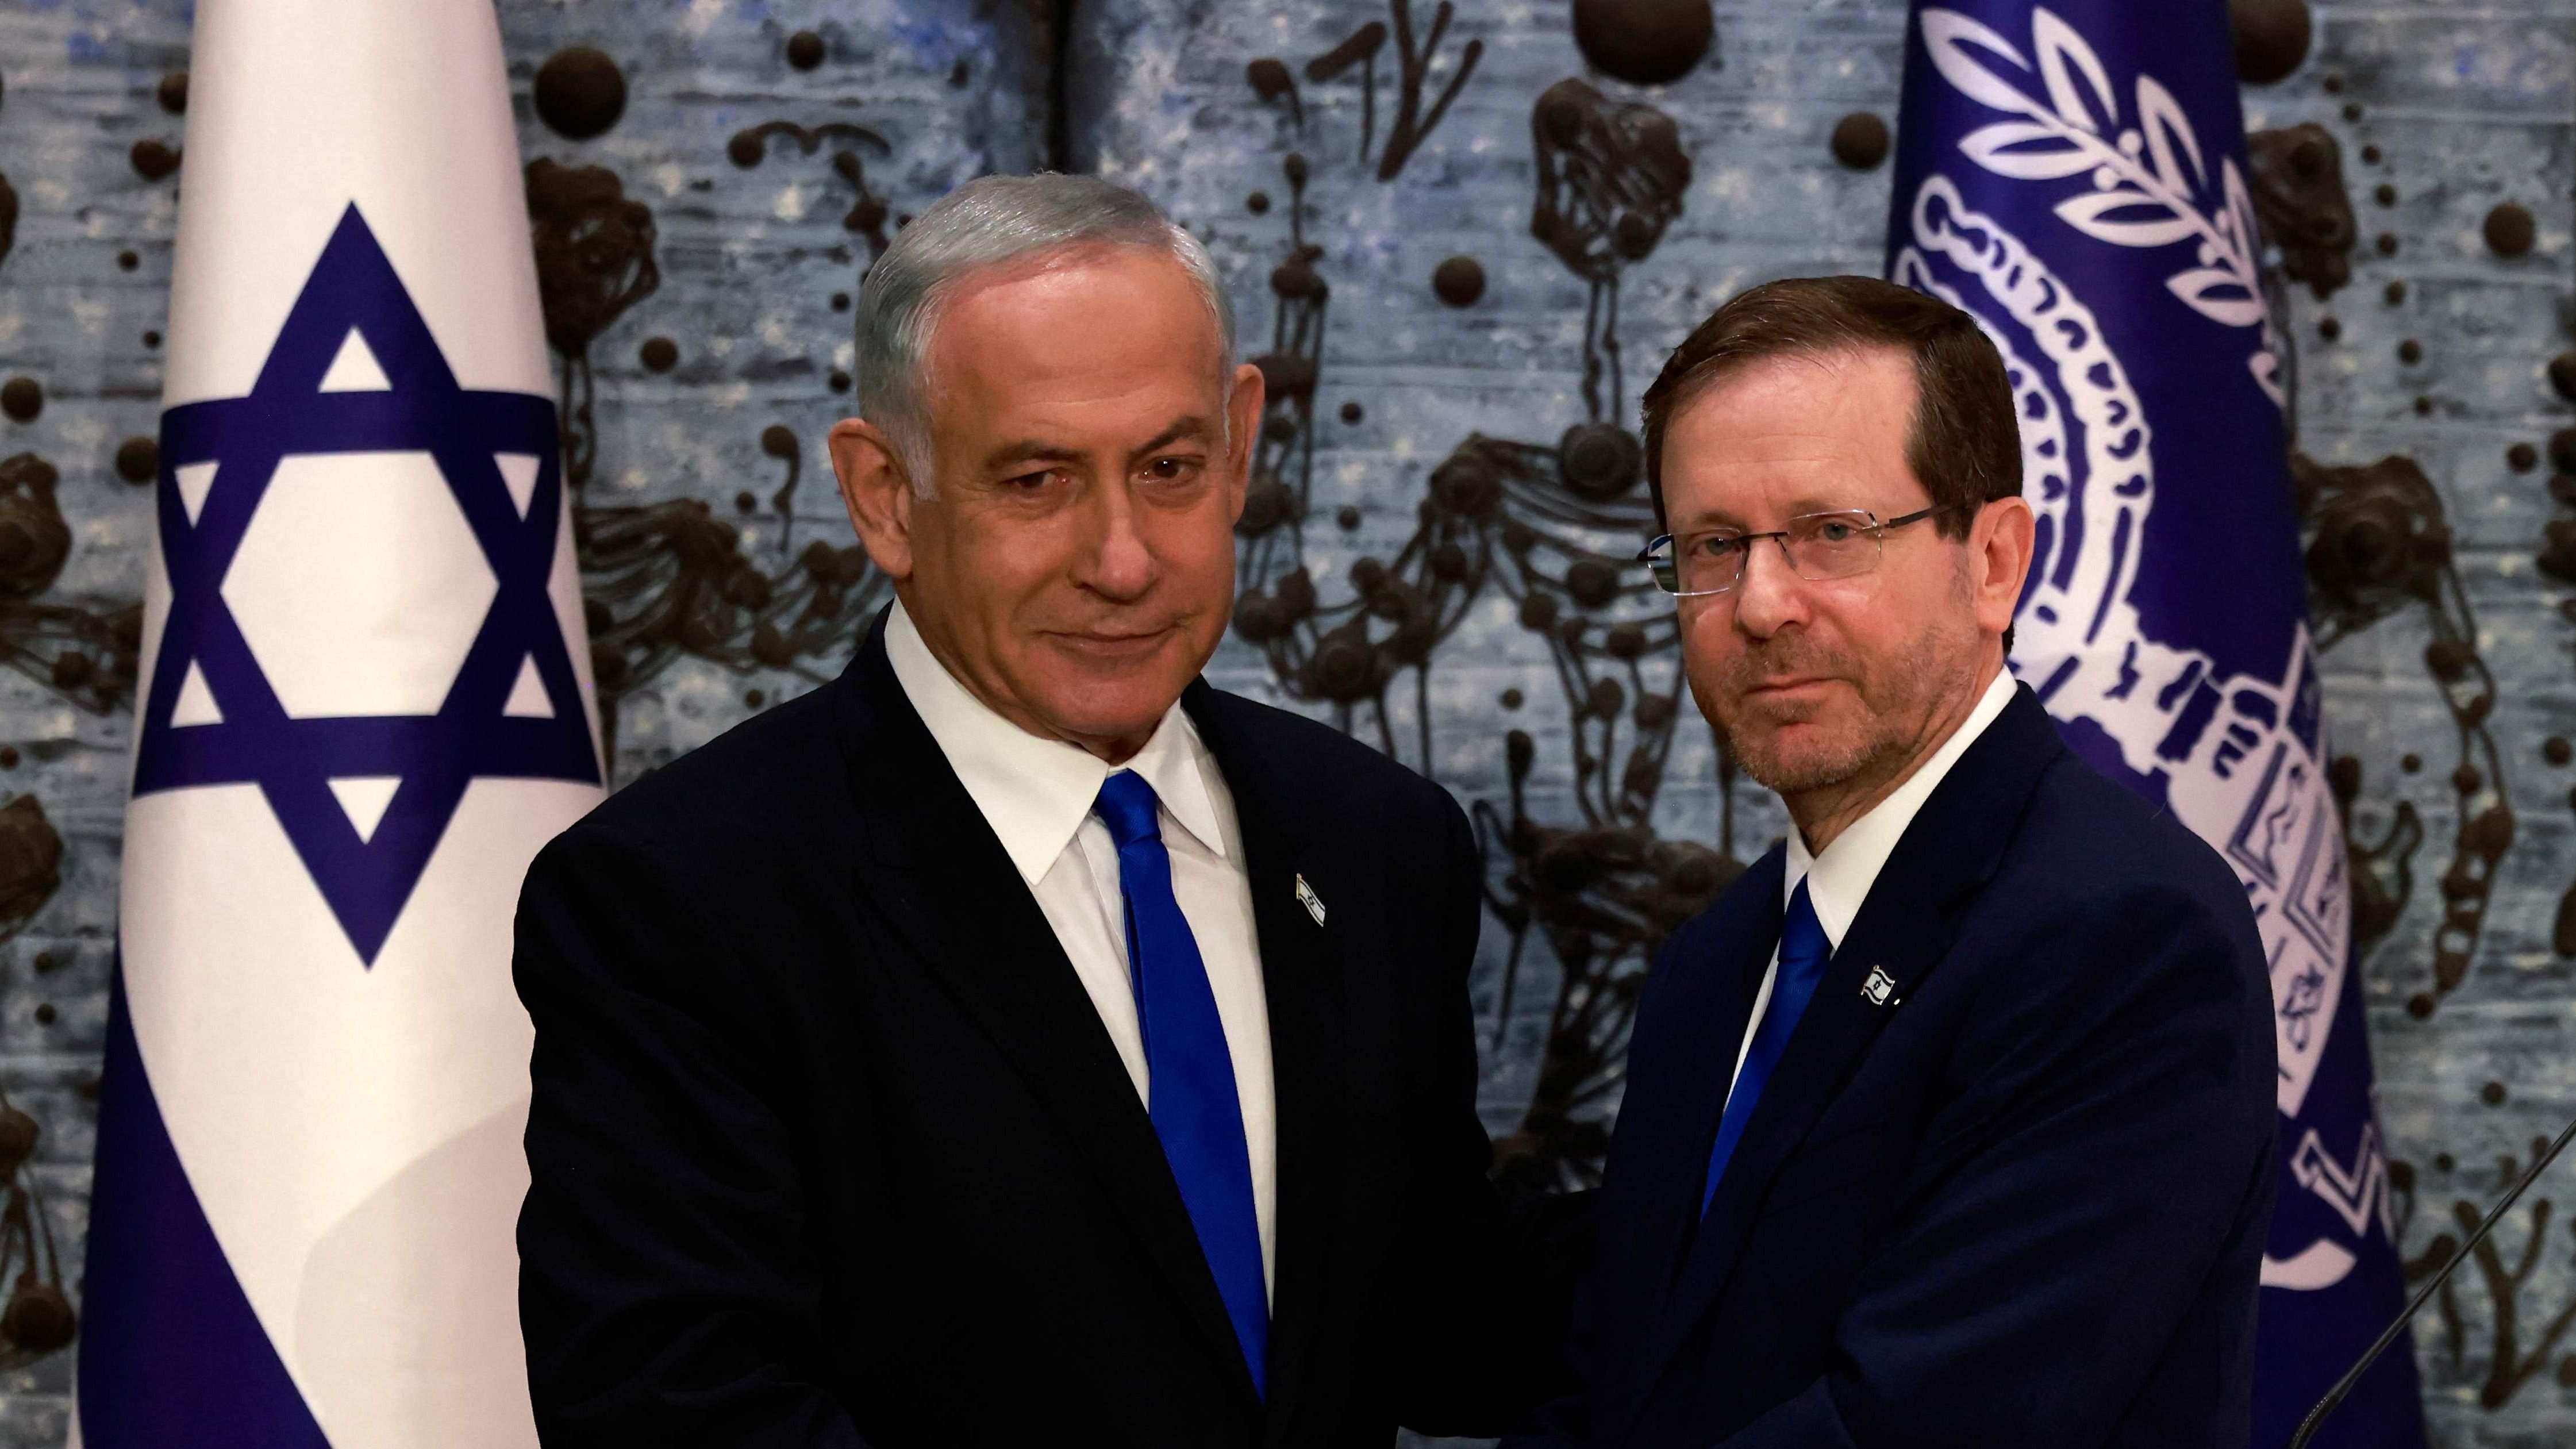 Herzog noted Netanyahu's ongoing trial over corruption allegations, which the right-wing veteran denies. Credit: AFP Photo